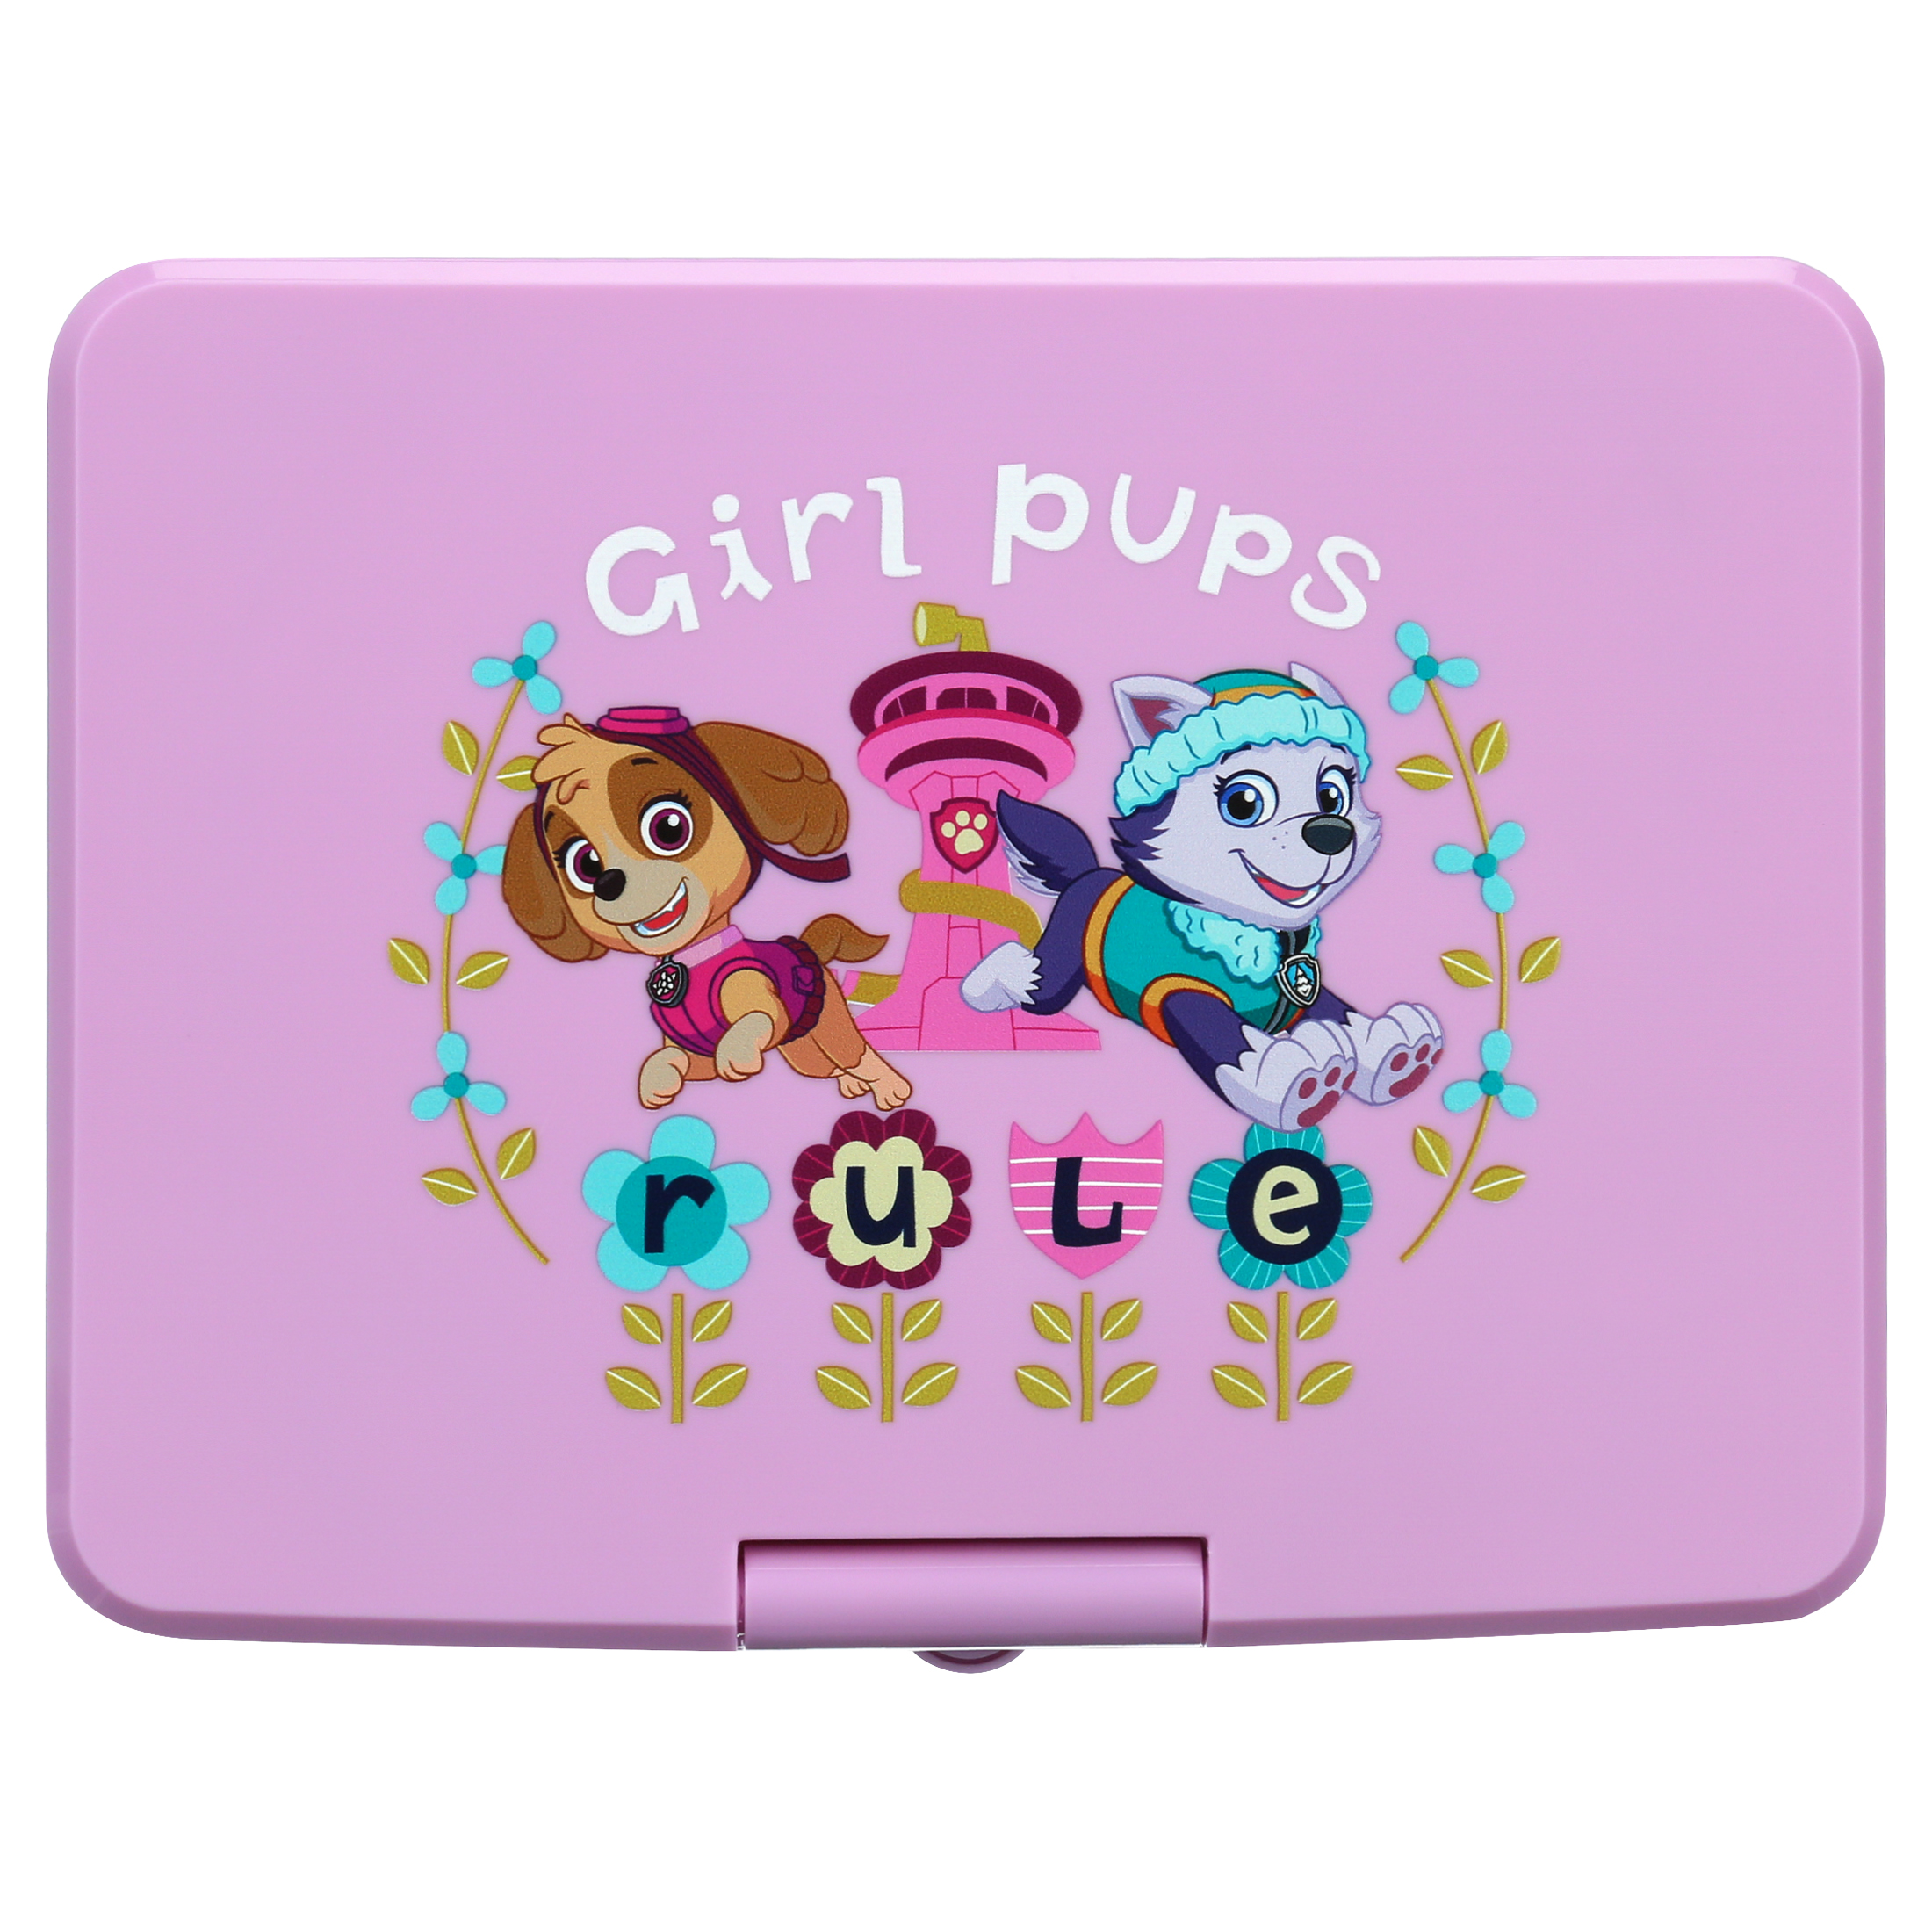 PAW Patrol 7" Portable DVD Player with Carrying Bag and Headphones, Pink - image 4 of 7